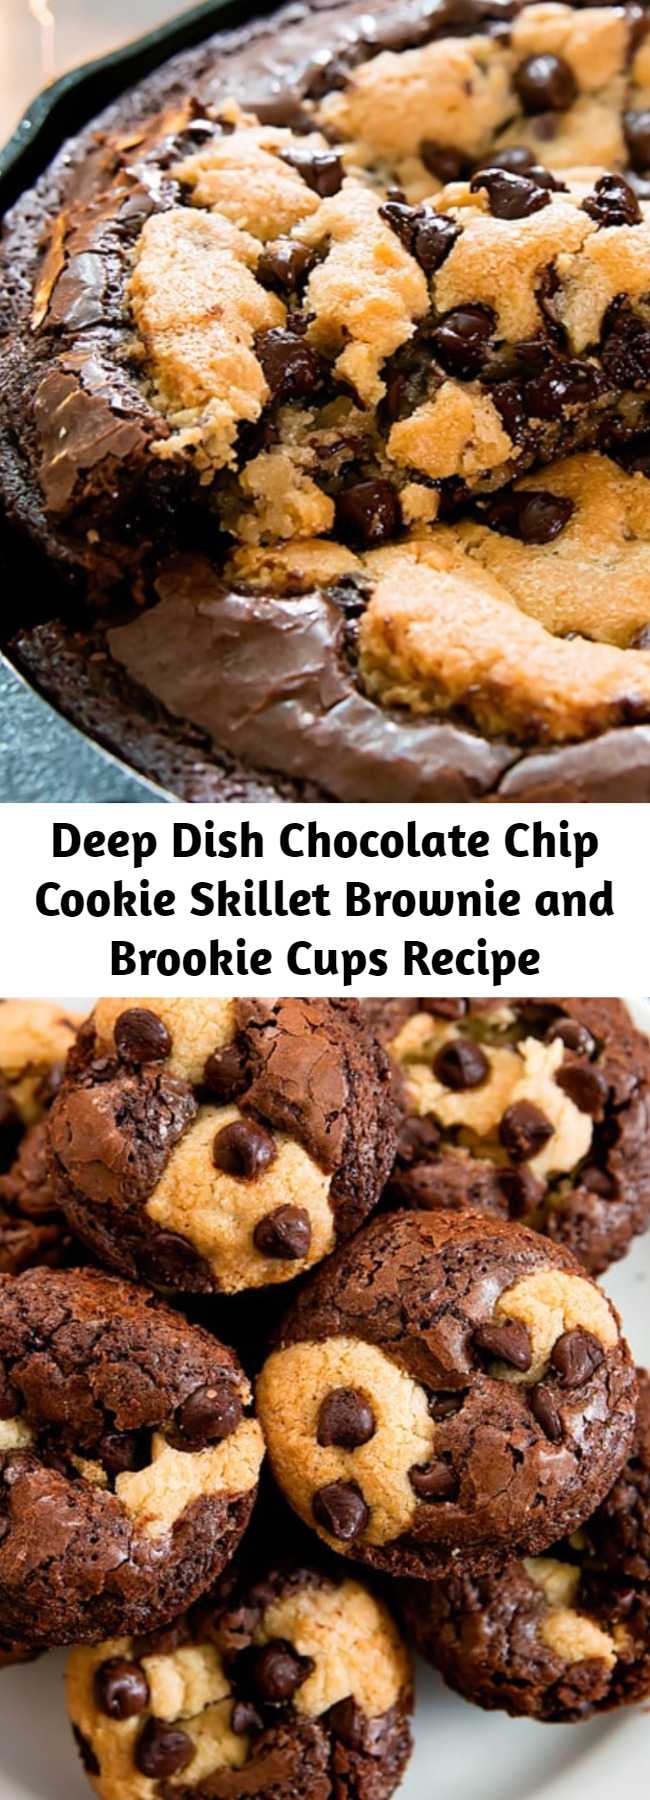 Deep Dish Chocolate Chip Cookie Skillet Brownie and Brookie Cups Recipe - Fudgy brownies and chocolate chip cookies are combined into one in these fun desserts so that you don’t have to choose. My Deep Dish Chocolate Chip Cookie Skillet Brownie has an outer skillet brownie layer with a deep chocolate chip cookie center. The result is a decadent, gooey dessert. Use the leftover batter to make brookie cups!